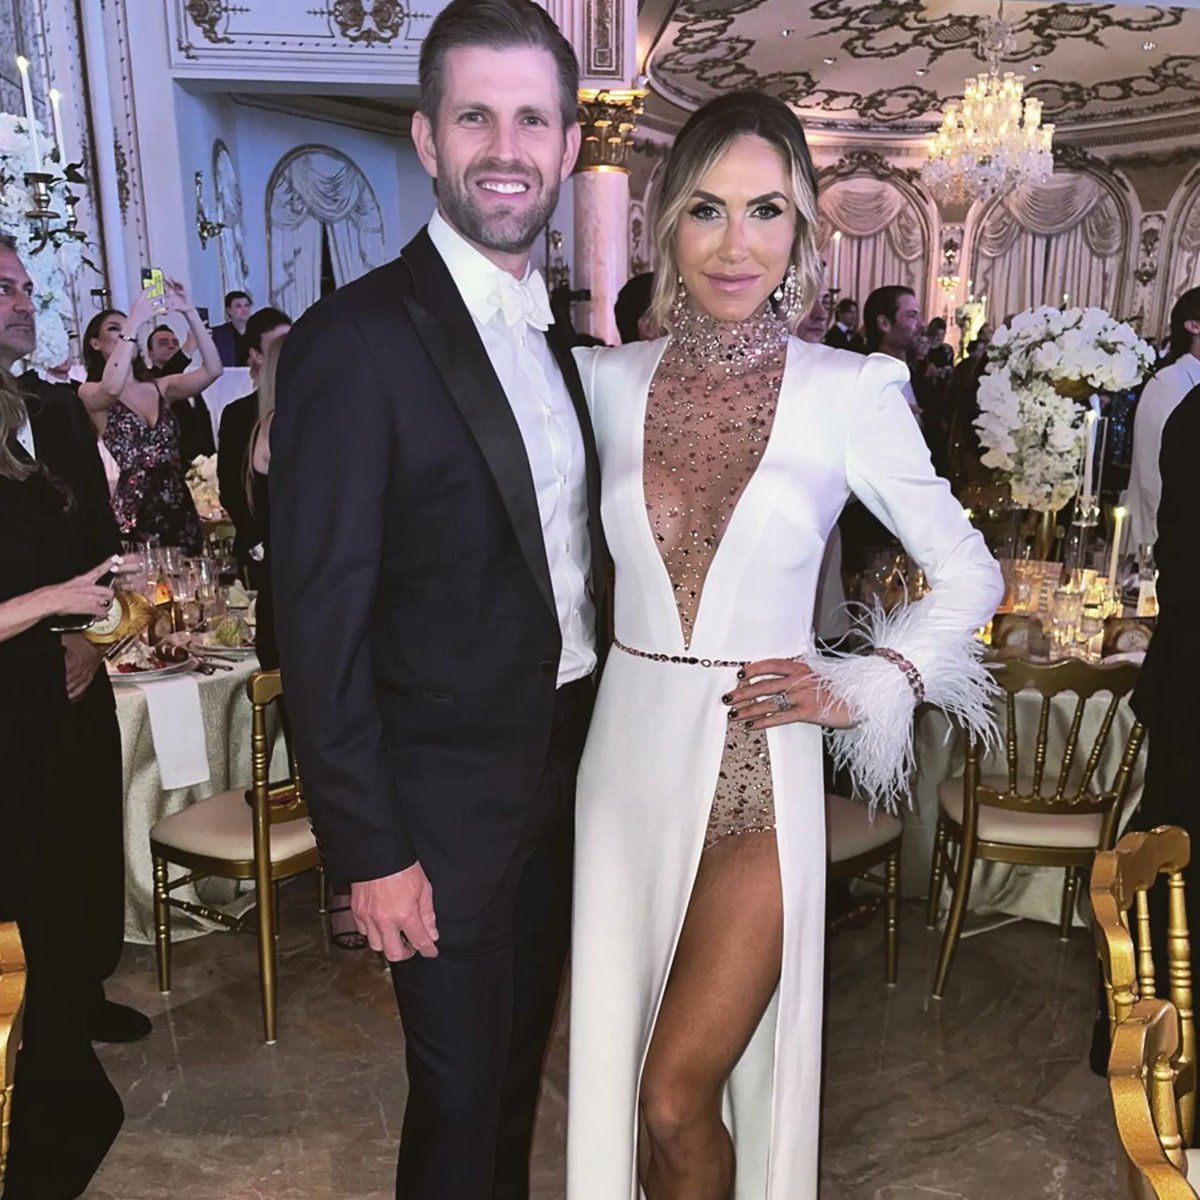 Eric and Lara Trump will be in the courtroom today. They'll also be using the names Lord Branley-Bladderbutt and Miss Fifi LeRhinestone to get out-of-town businessmen drunk at a local bar and steal their watches and credit cards